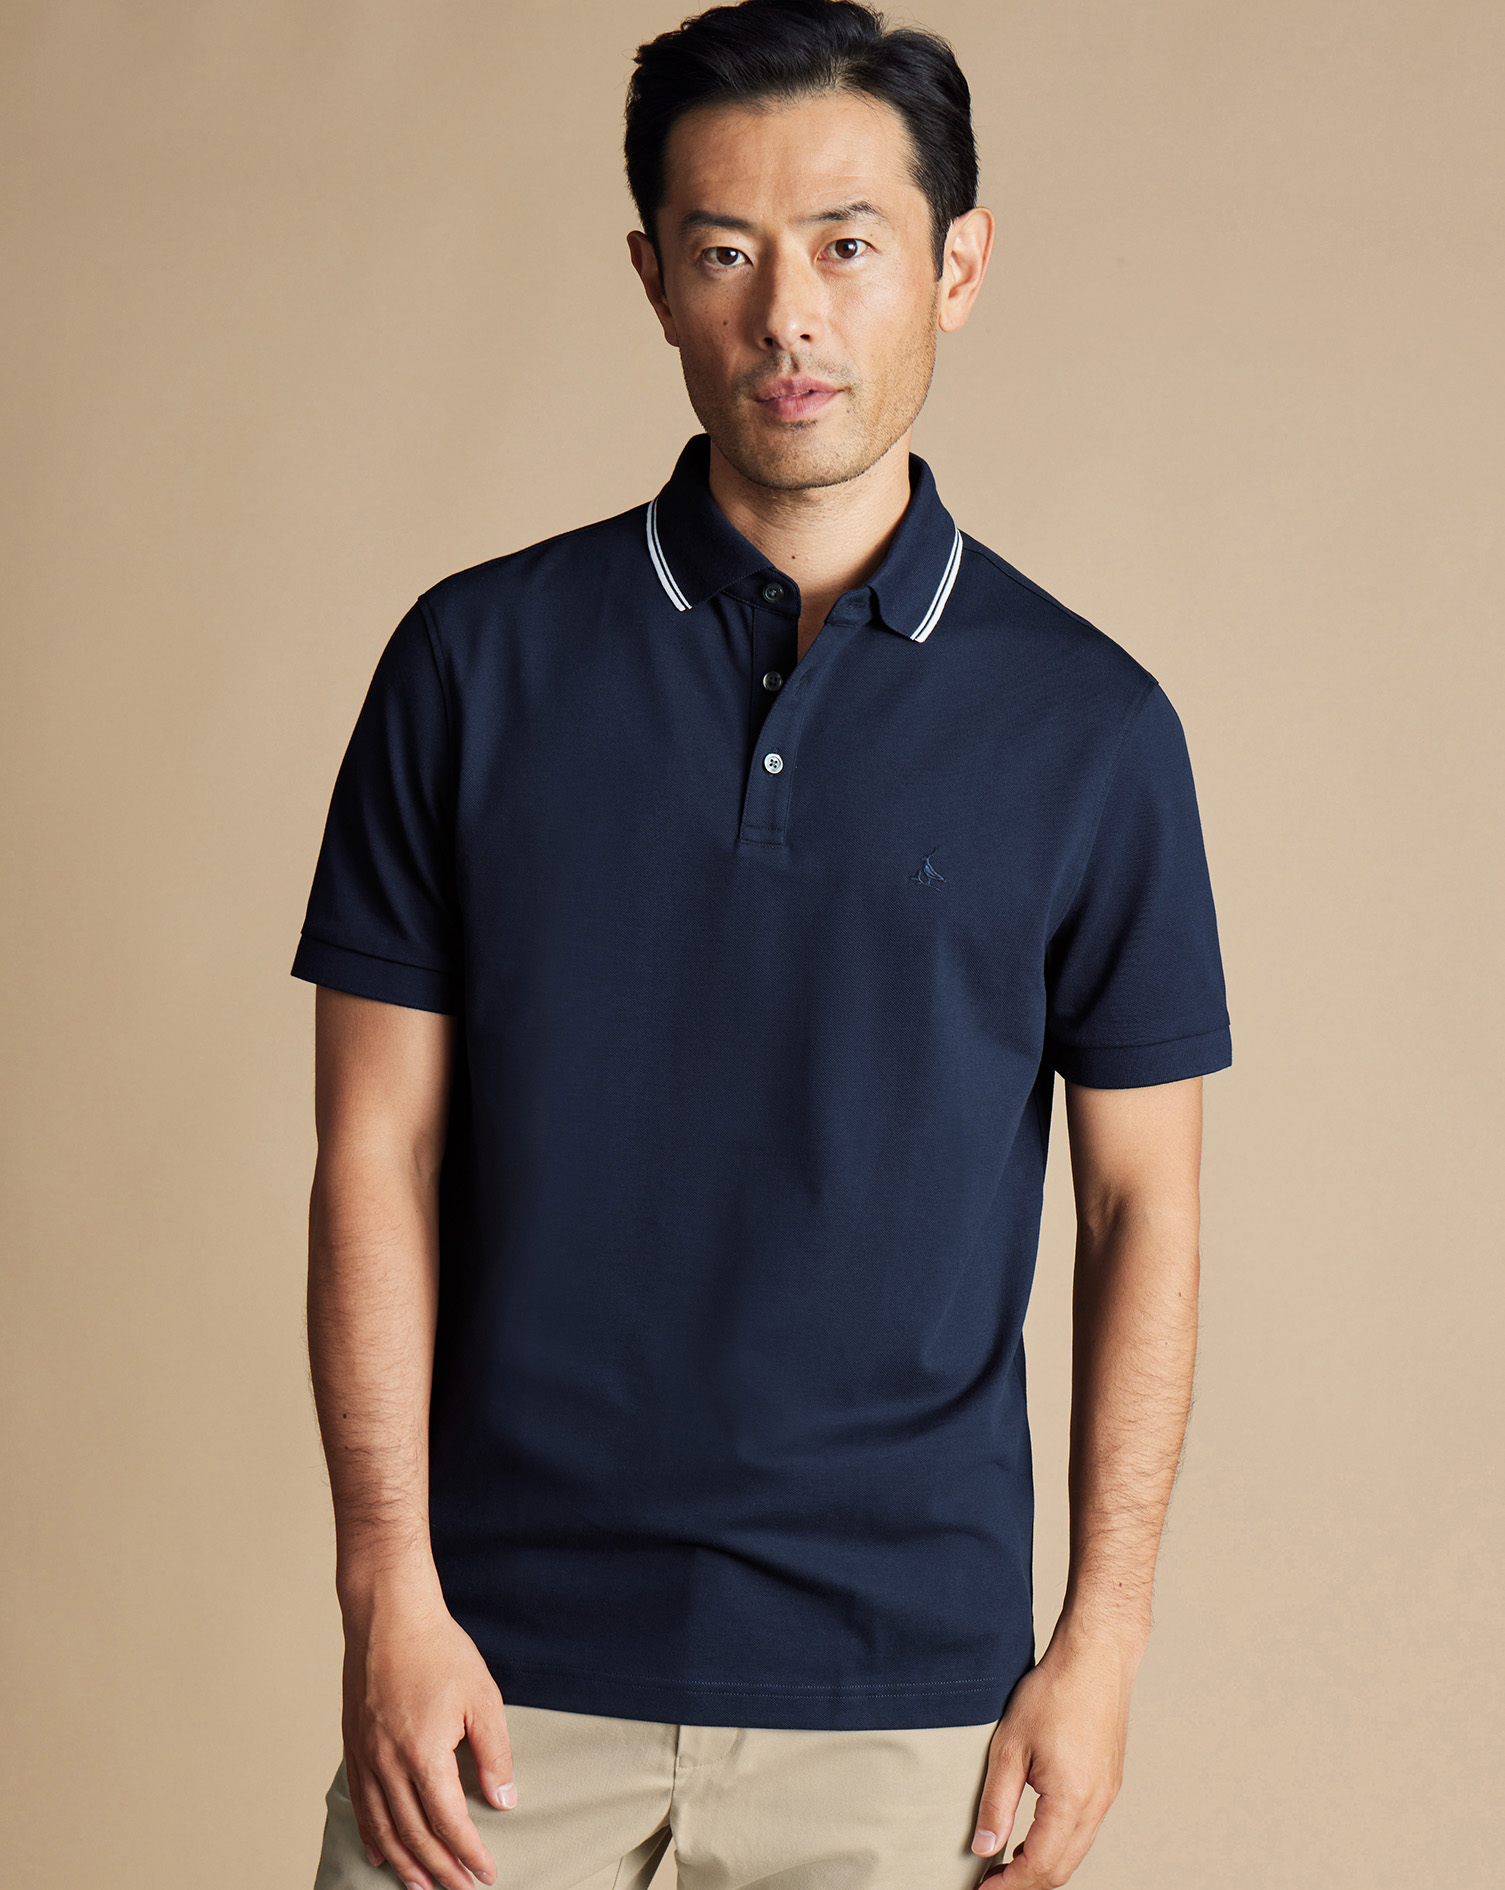 Men's Charles Tyrwhitt Pique Contrast Tipping Polo Shirt - Navy Blue Size Small Cotton
